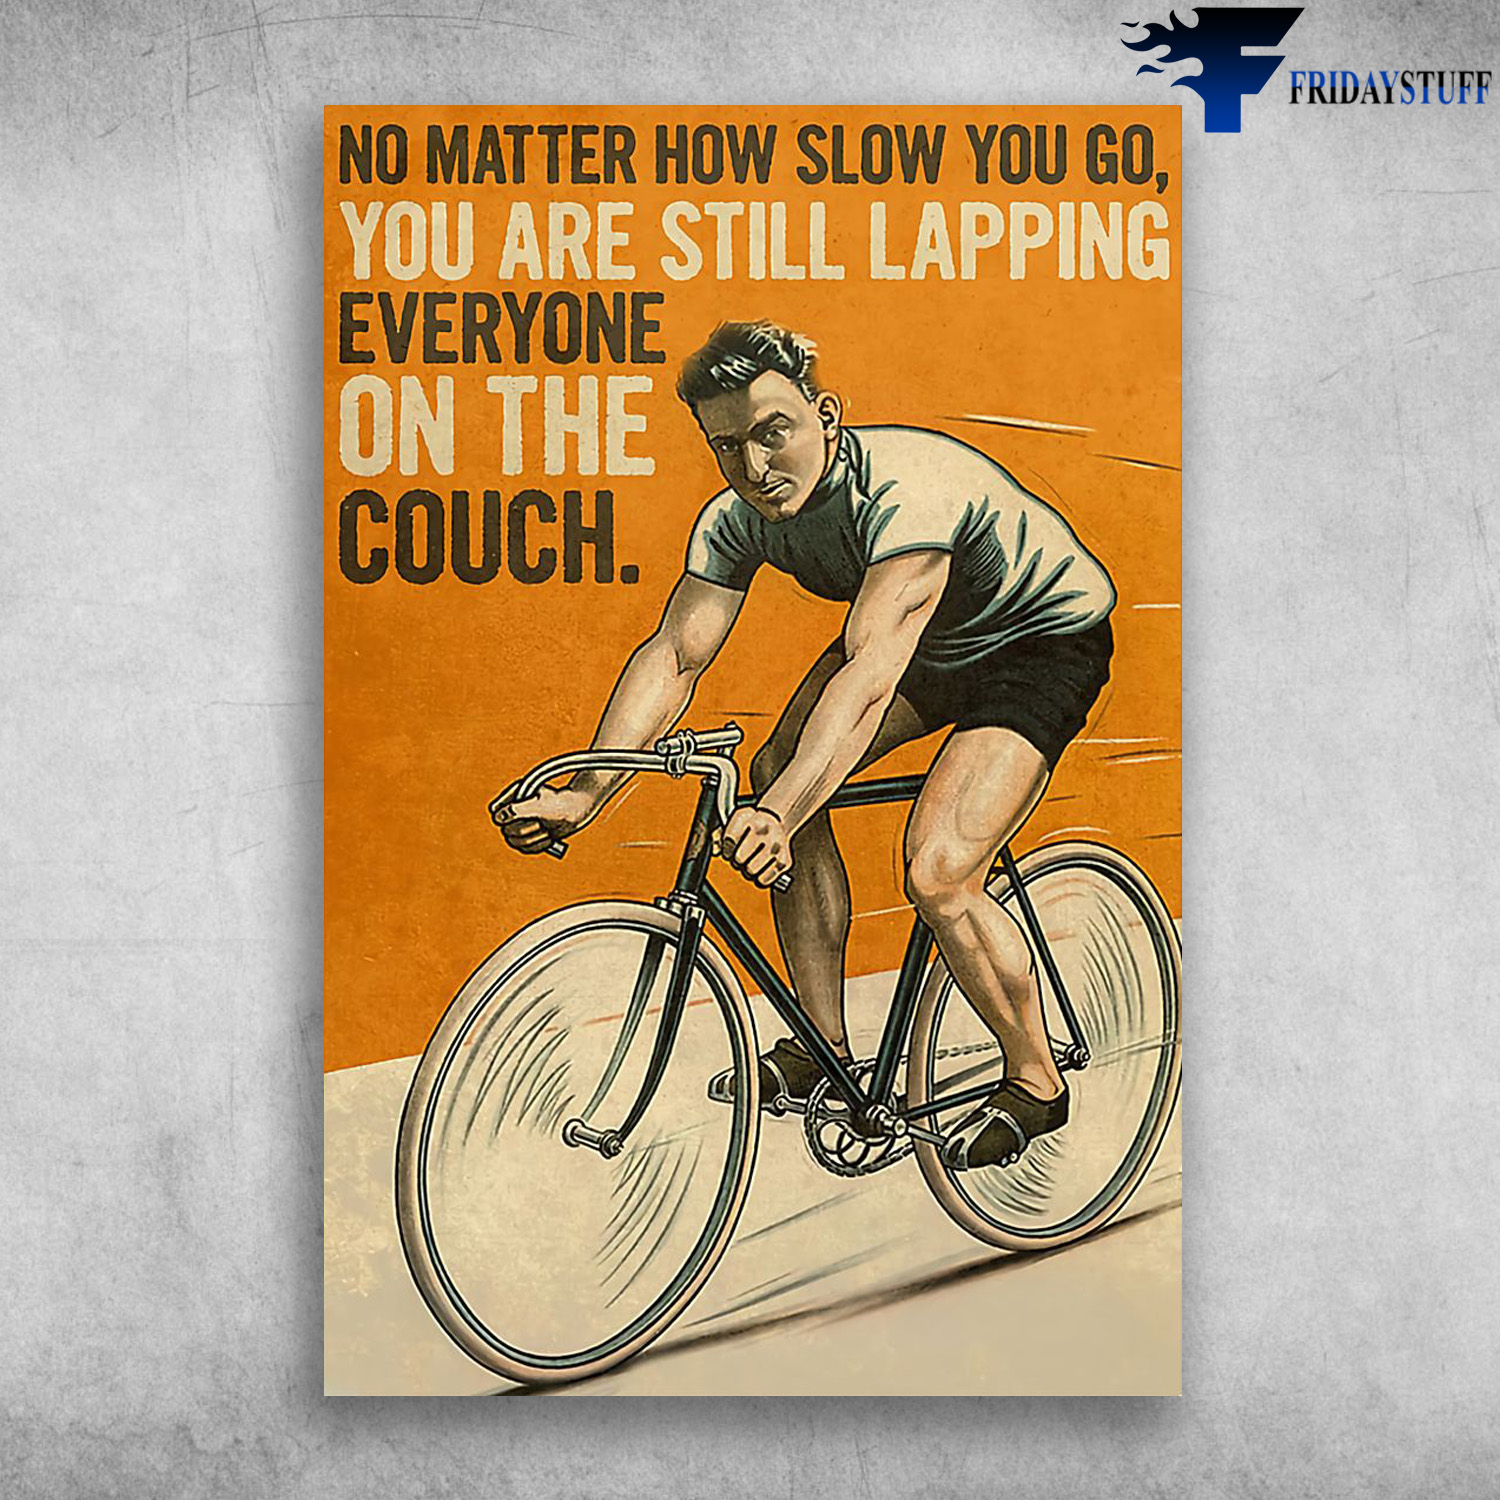 Man Cycling - No Matter How Slow You Go, You Are Still Lapping Everyone On The Couch